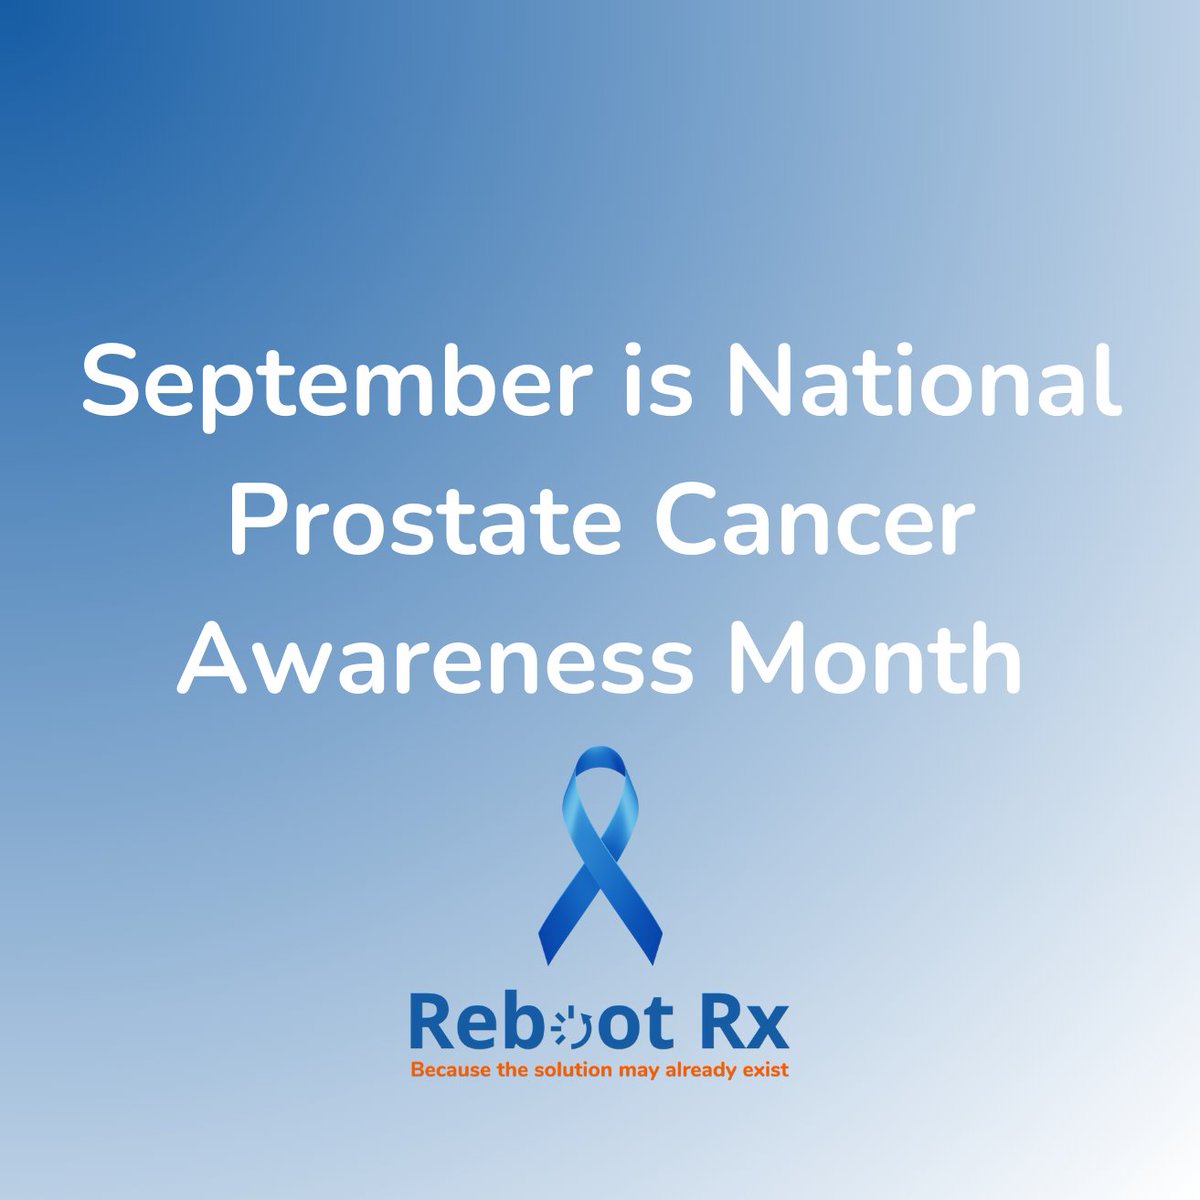 For #ProstateCancerAwarenessMonth, we are sharing why we chose to work on #ProstateCancer and our progress. It is a common cancer, many non-cancer generics have already been tested for prostate cancer, and oncologists and patients were eager to collaborate.